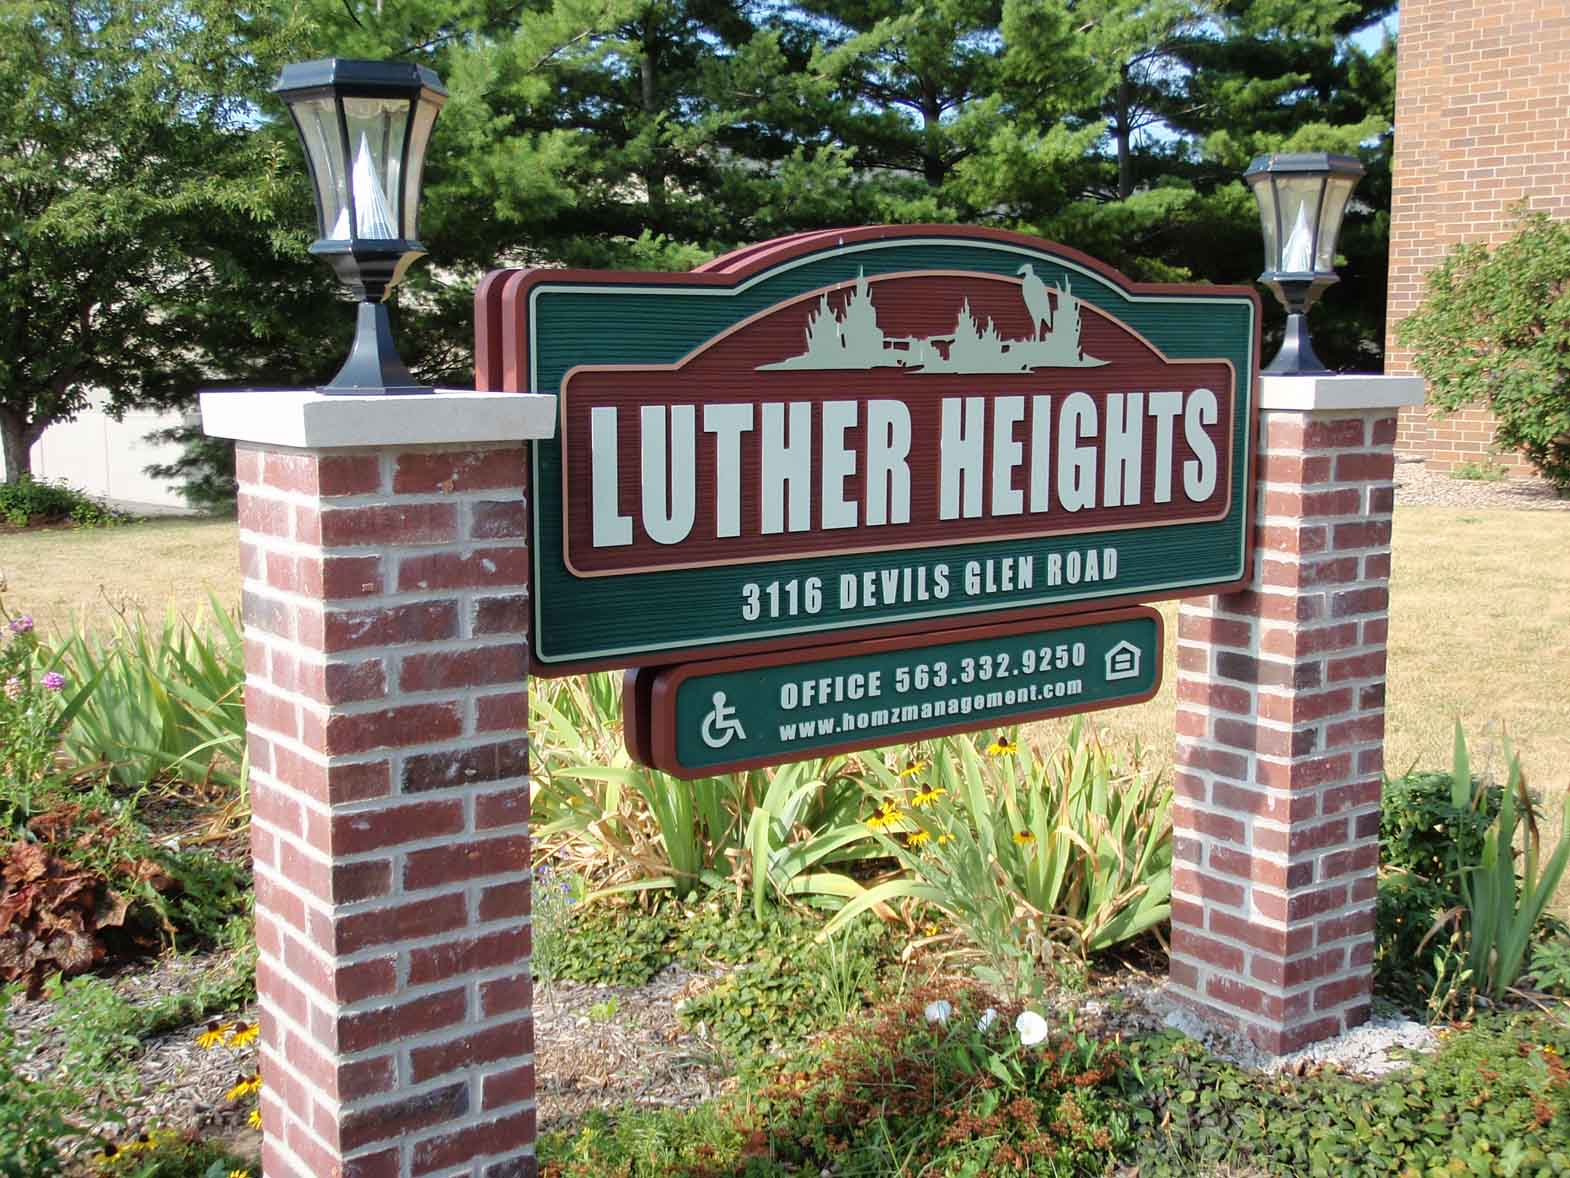 LUTHER HEIGHTS